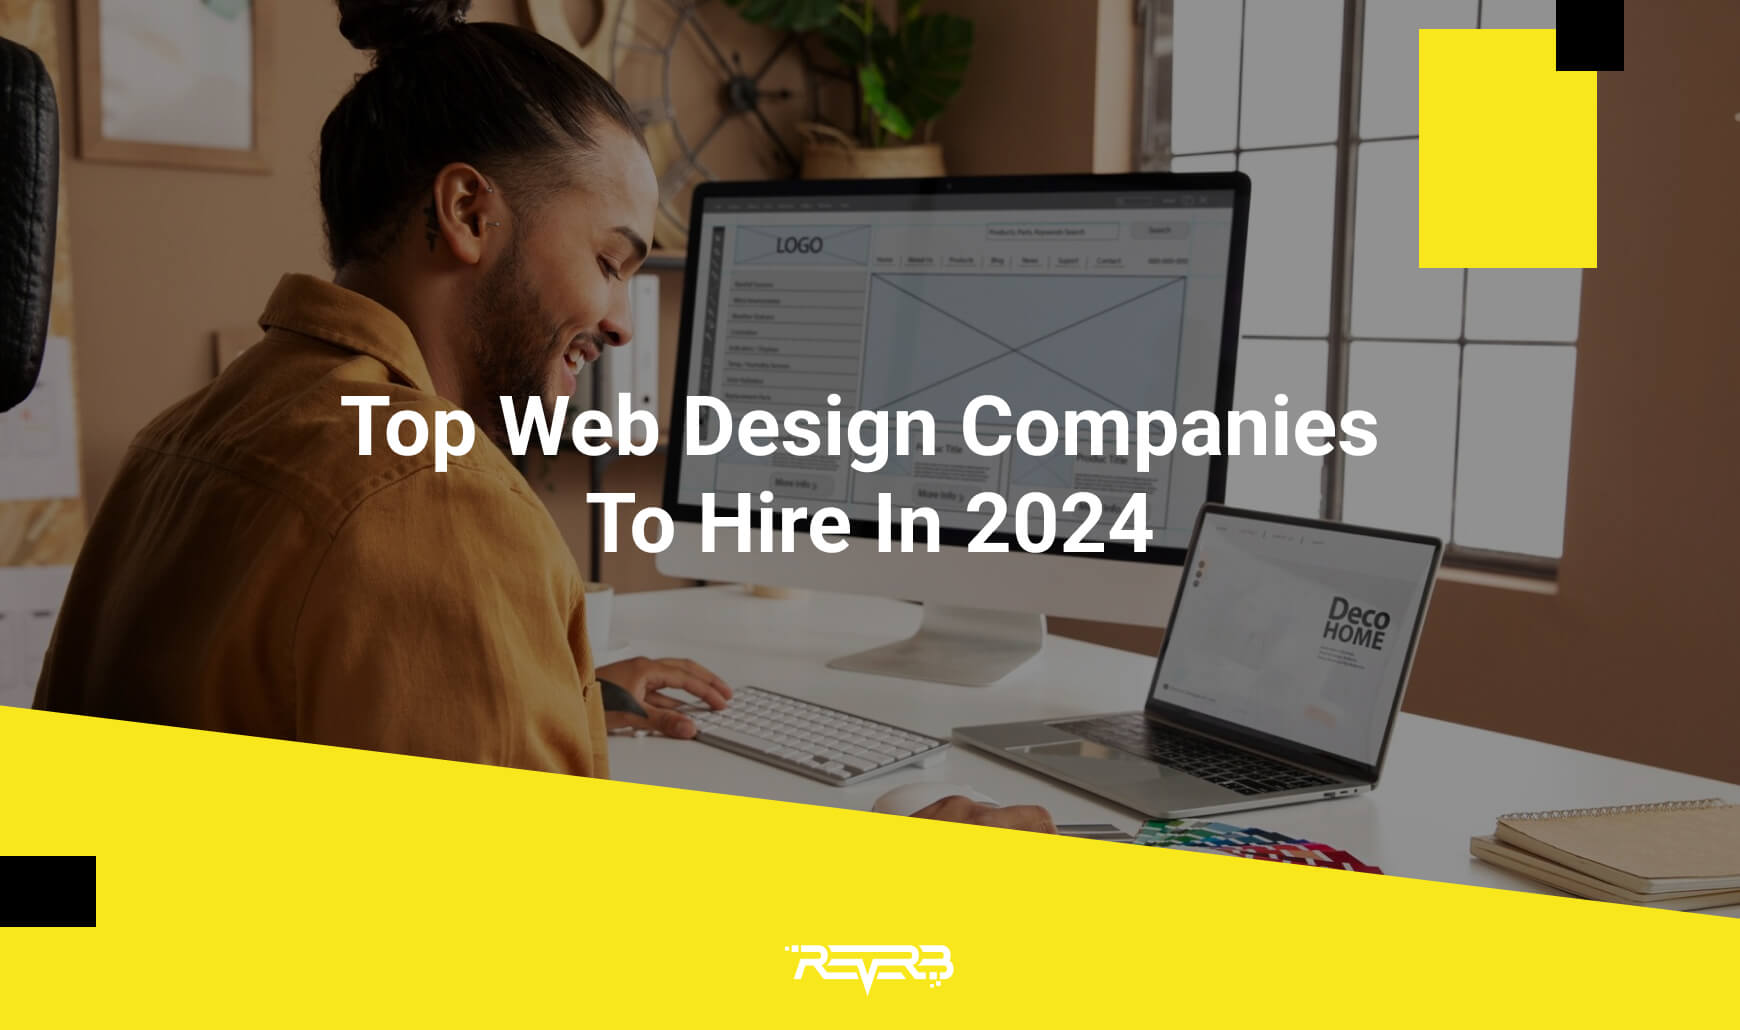 Top Web Design Companies To Hire In 2024 